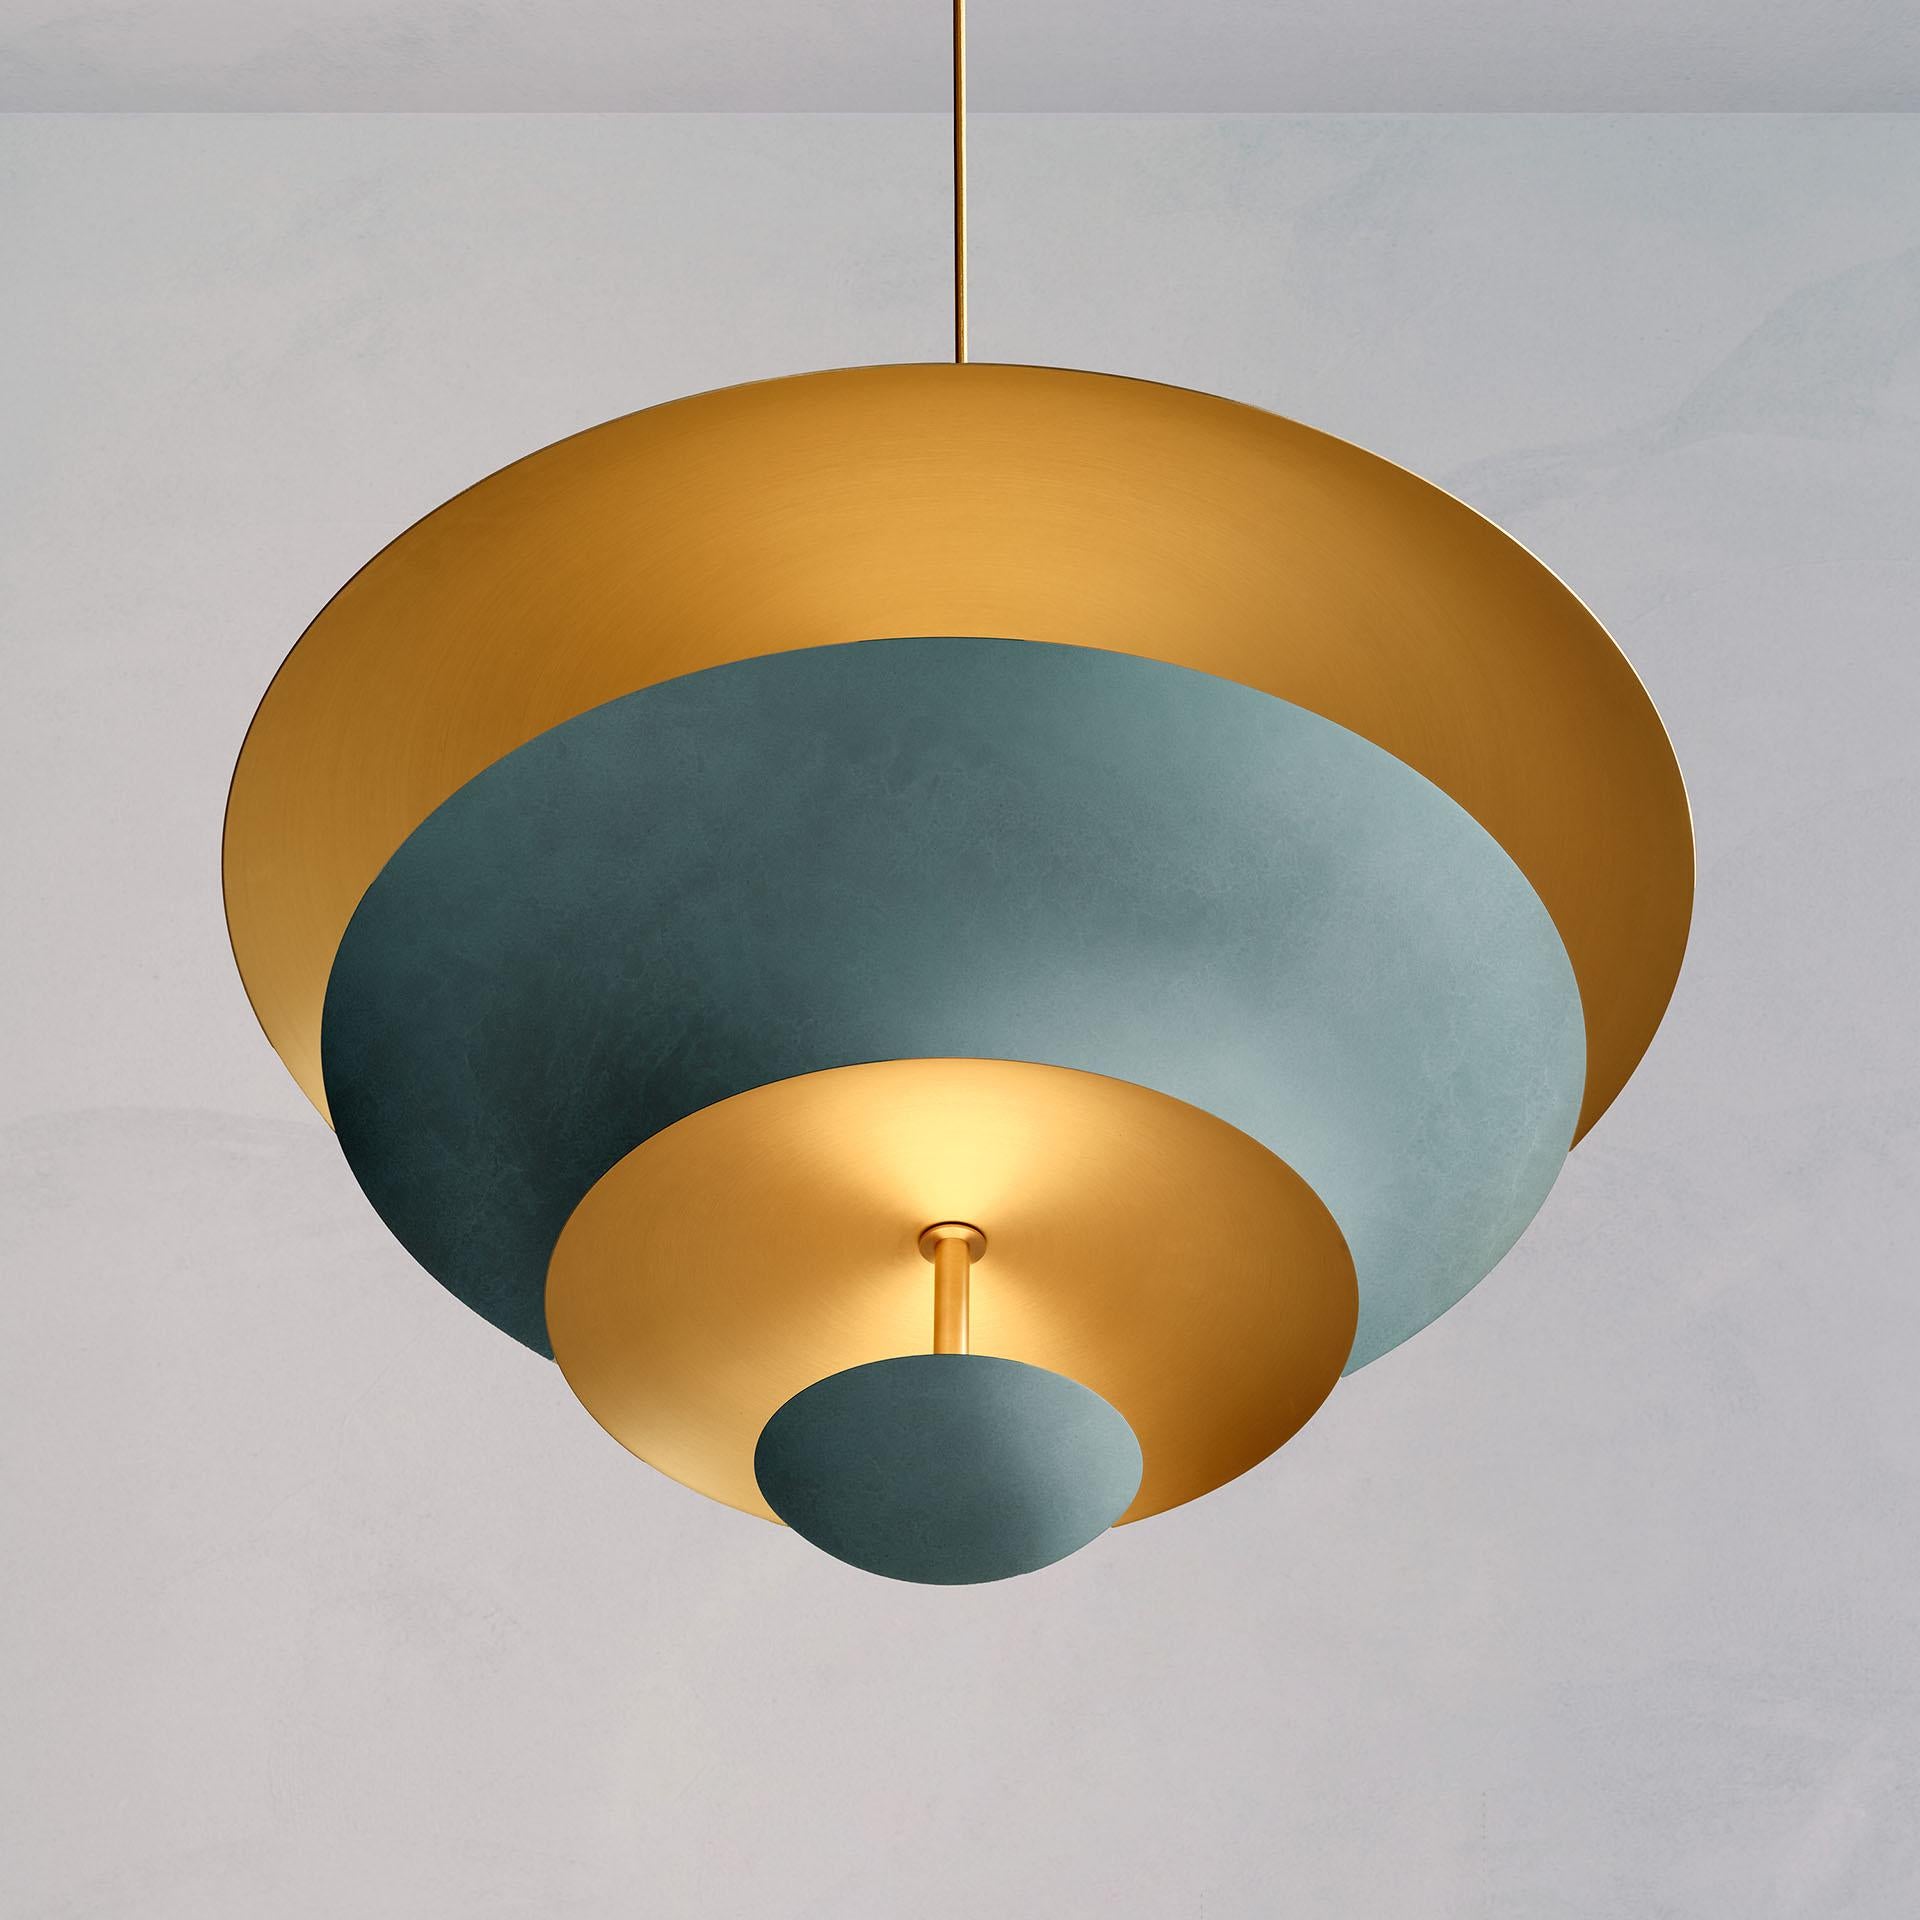 'Cosmic Verdigris Chandelier 70' Handmade Verdigris Patinated Brass Ceiling Lamp In New Condition For Sale In London, GB